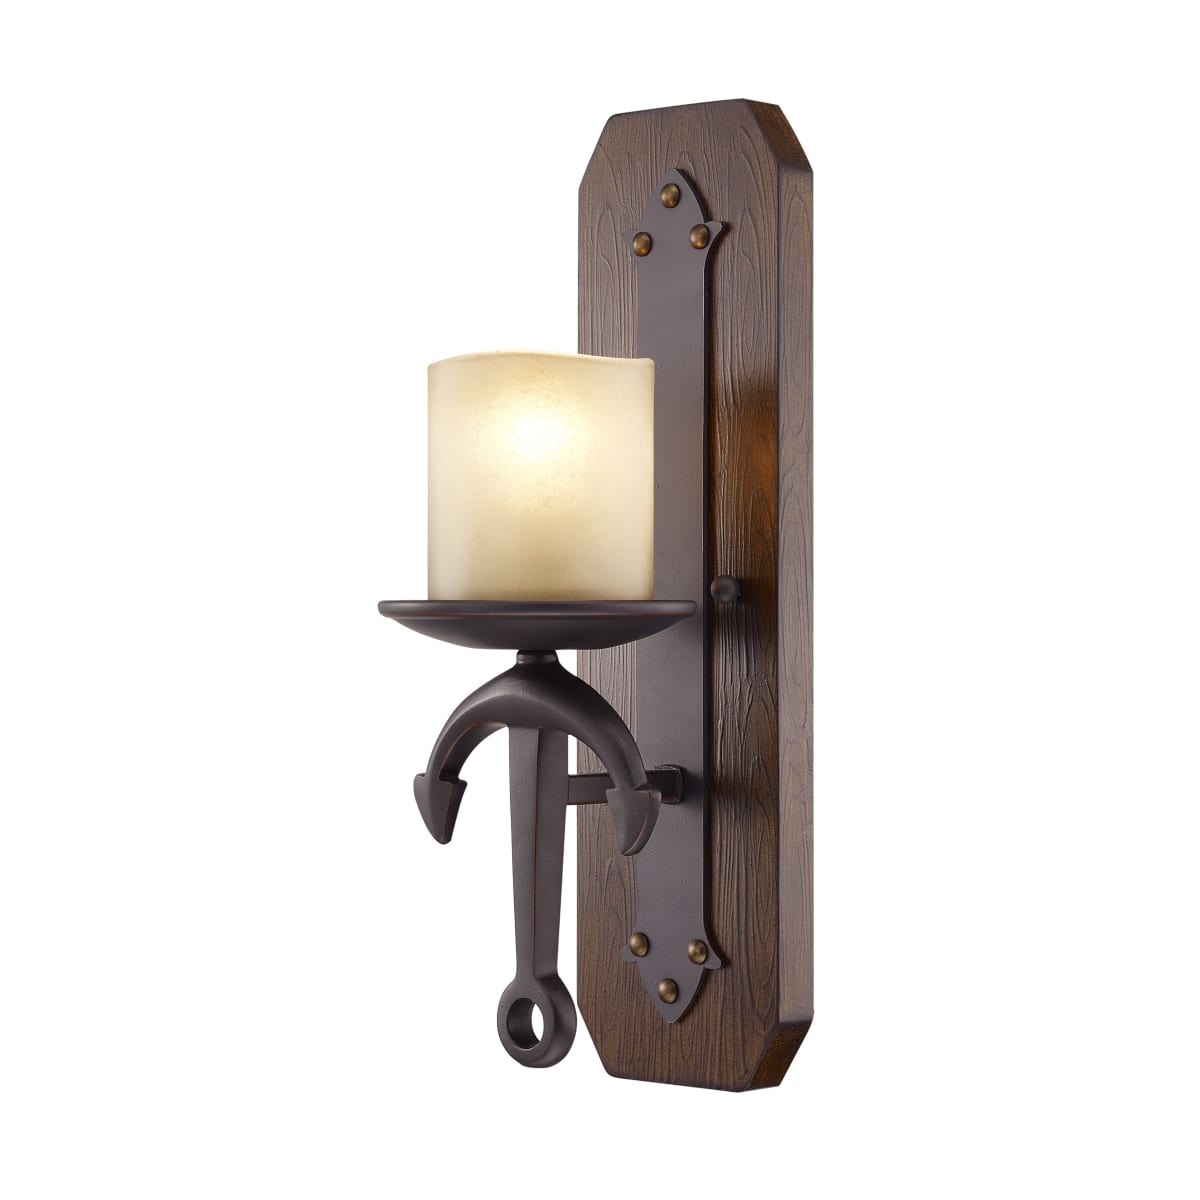 Olde Bronze Livex Lighting 4861-67 Cape May 1-Light Wall Sconce